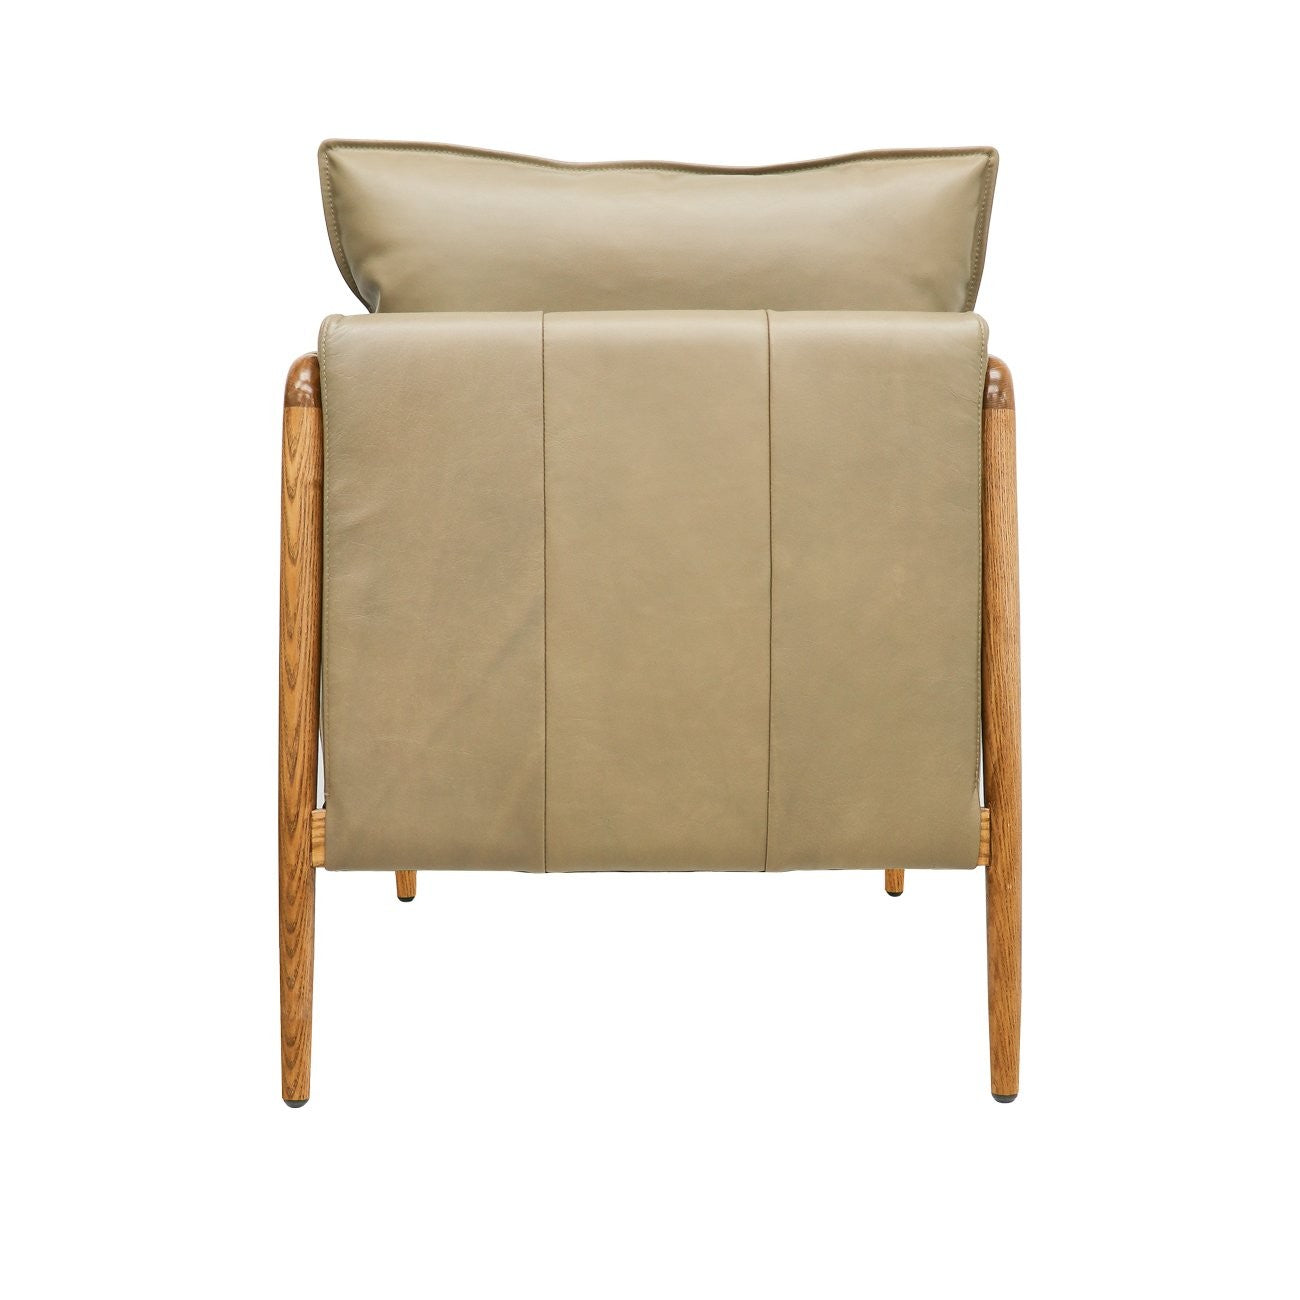 Saddle Occasional Chair - Beige Leather